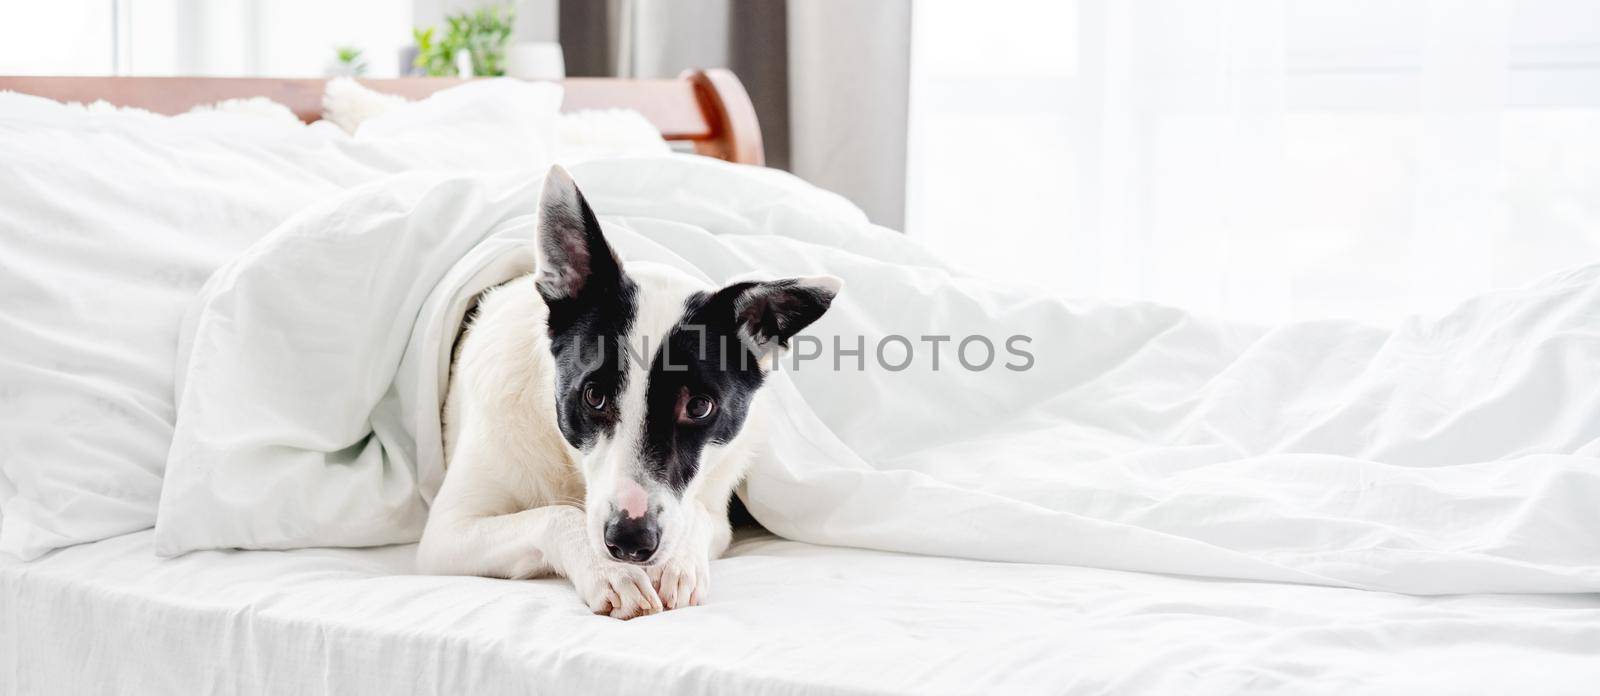 Cute white with black ears dog lying in the bed under blanket in sunny room and looking at the camera. Adorable pet doggy resting in the bedroom in the morning